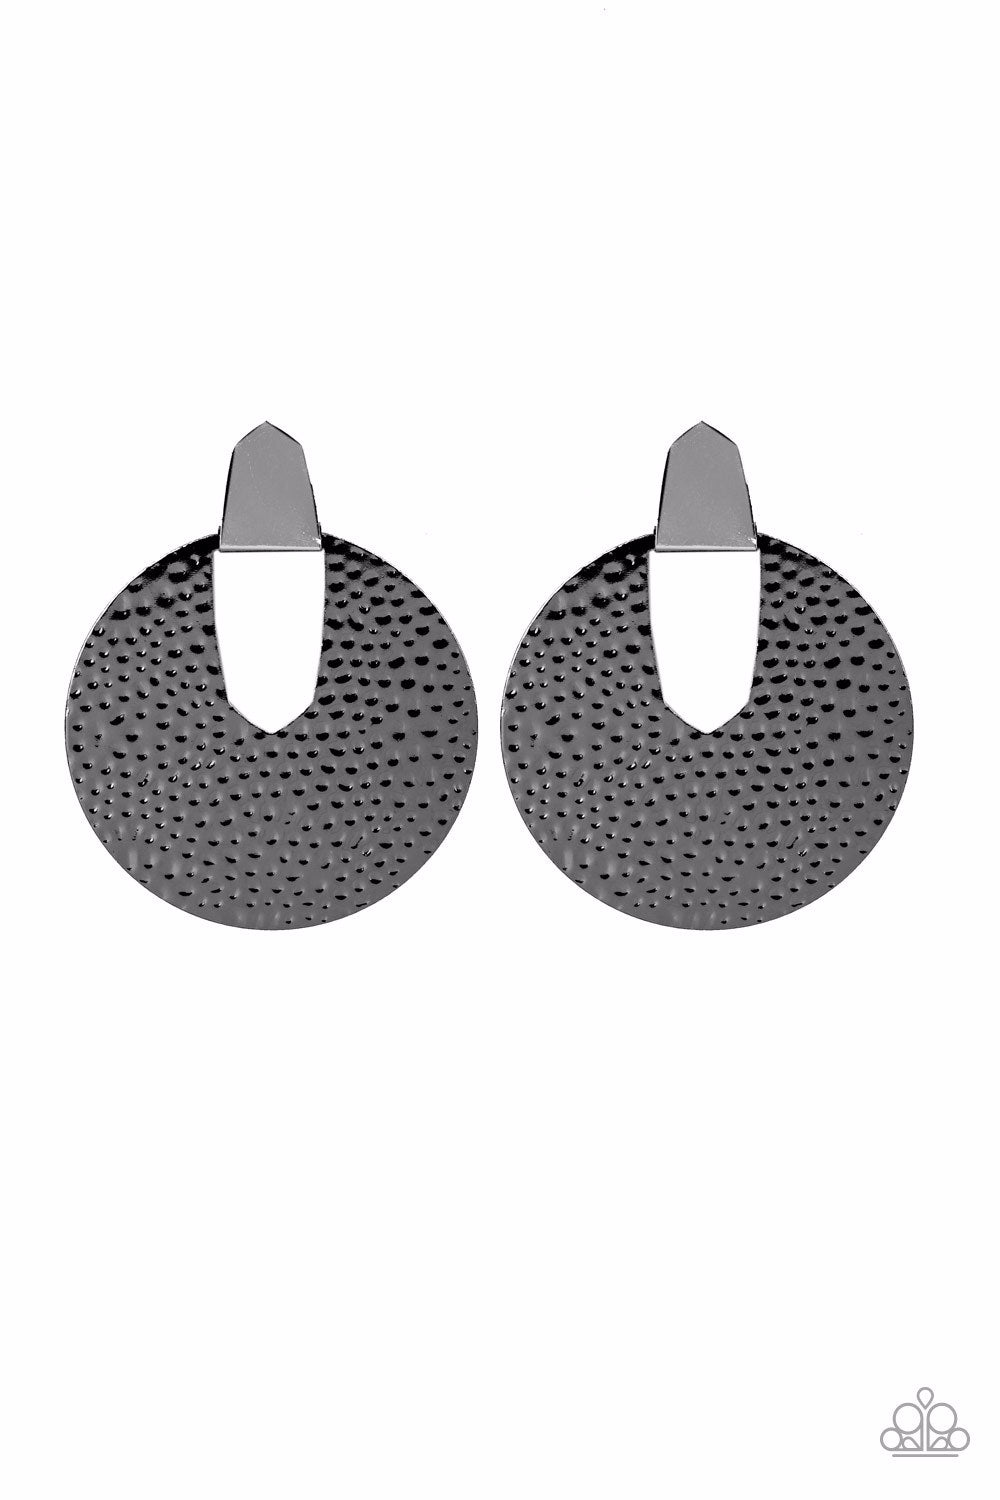 Bold Intentions Black Post Earring (FF -520)